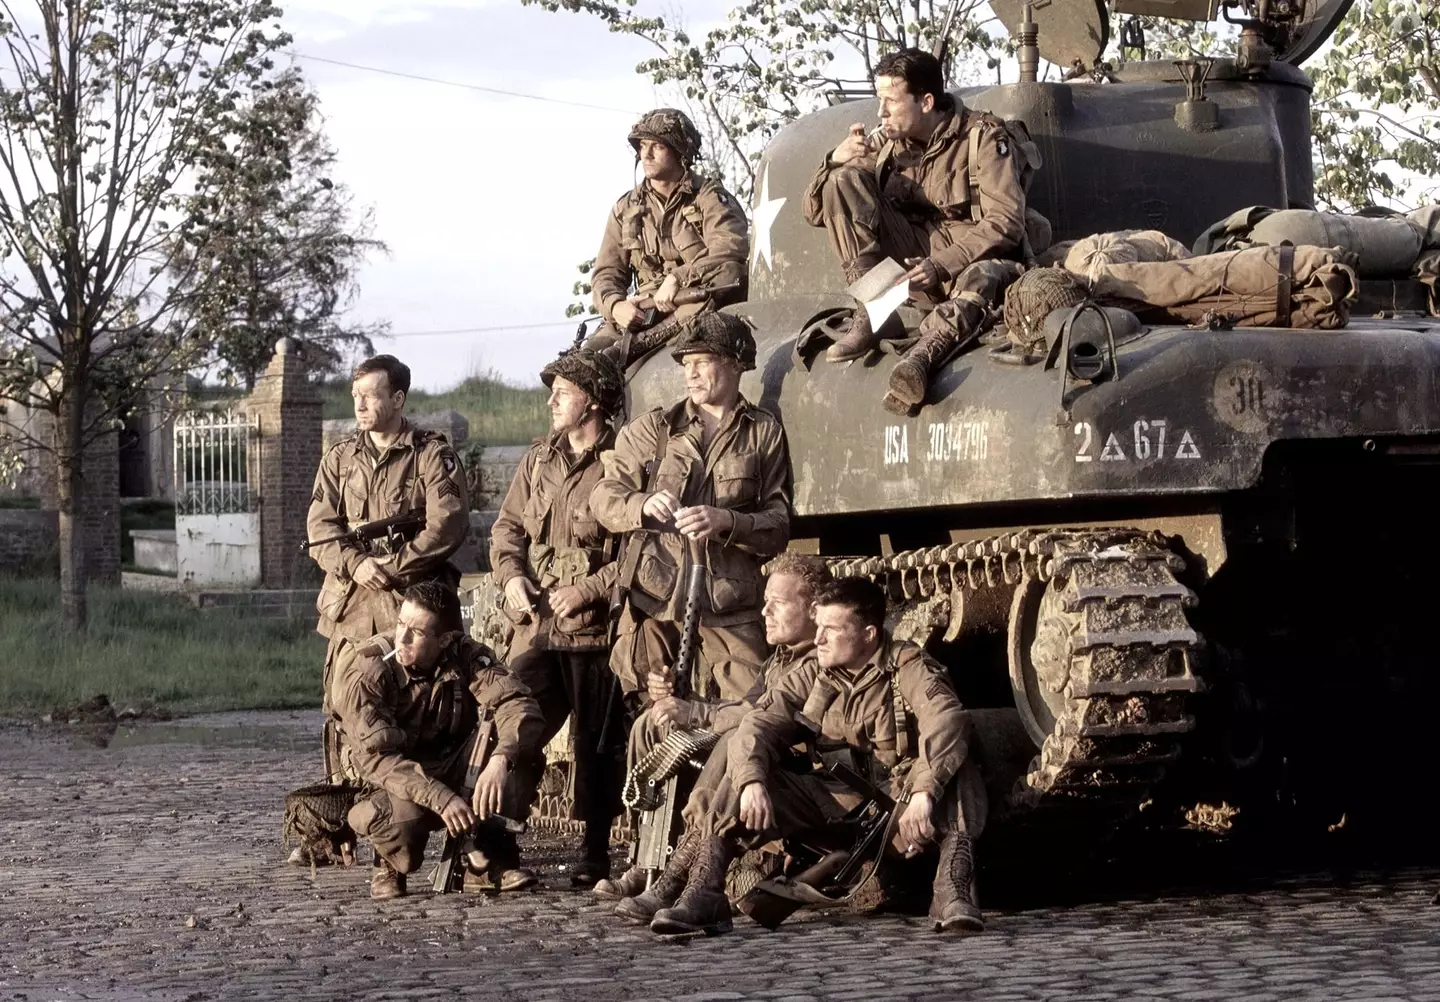 Band of Brothers was a miniseries that first aired in 2001. (HBO)